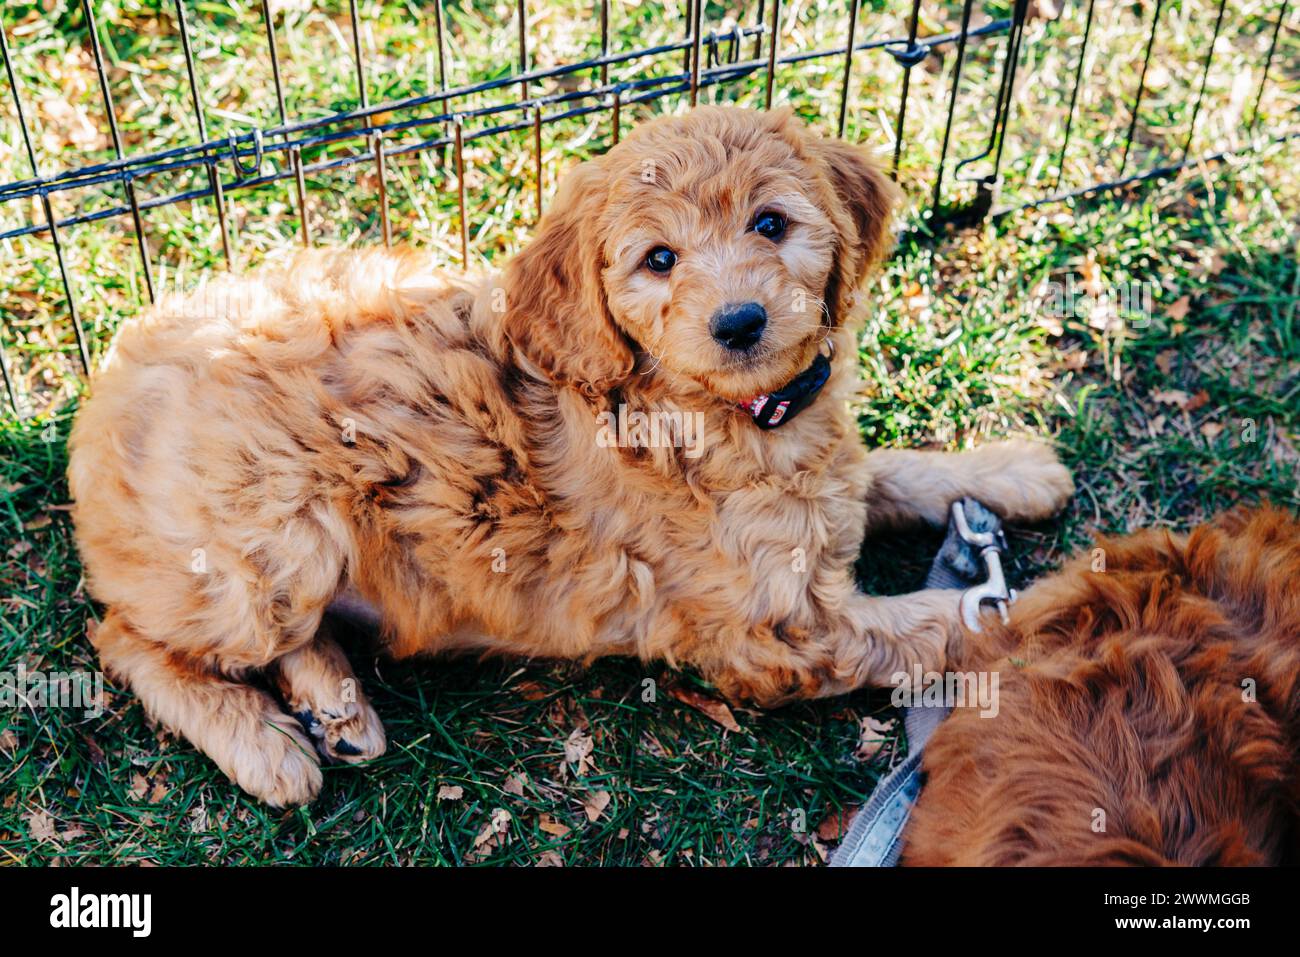 Darling Goldendoodle puppy with pink collar laying in grass Stock Photo